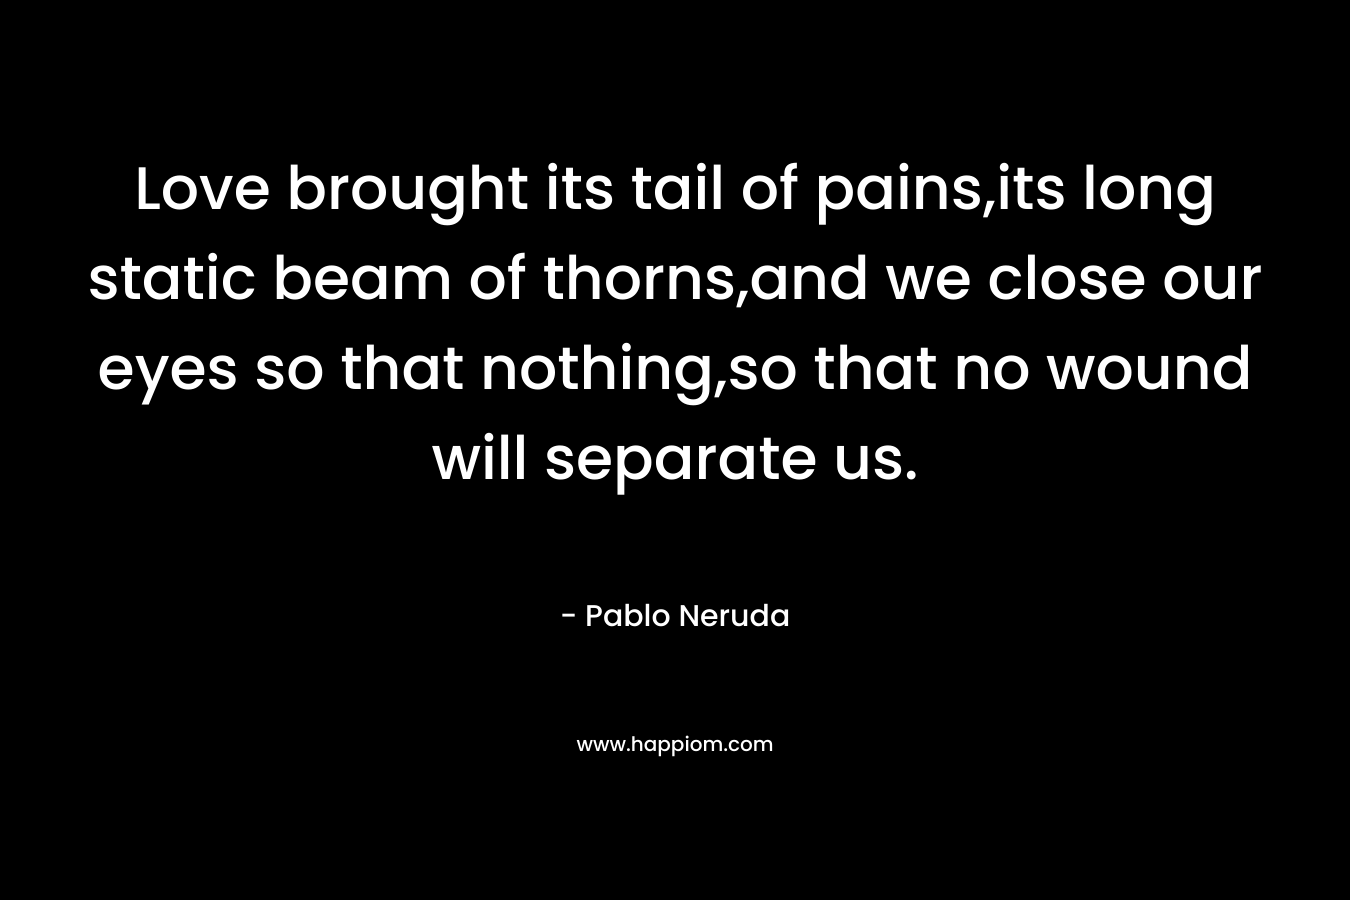 Love brought its tail of pains,its long static beam of thorns,and we close our eyes so that nothing,so that no wound will separate us. – Pablo Neruda